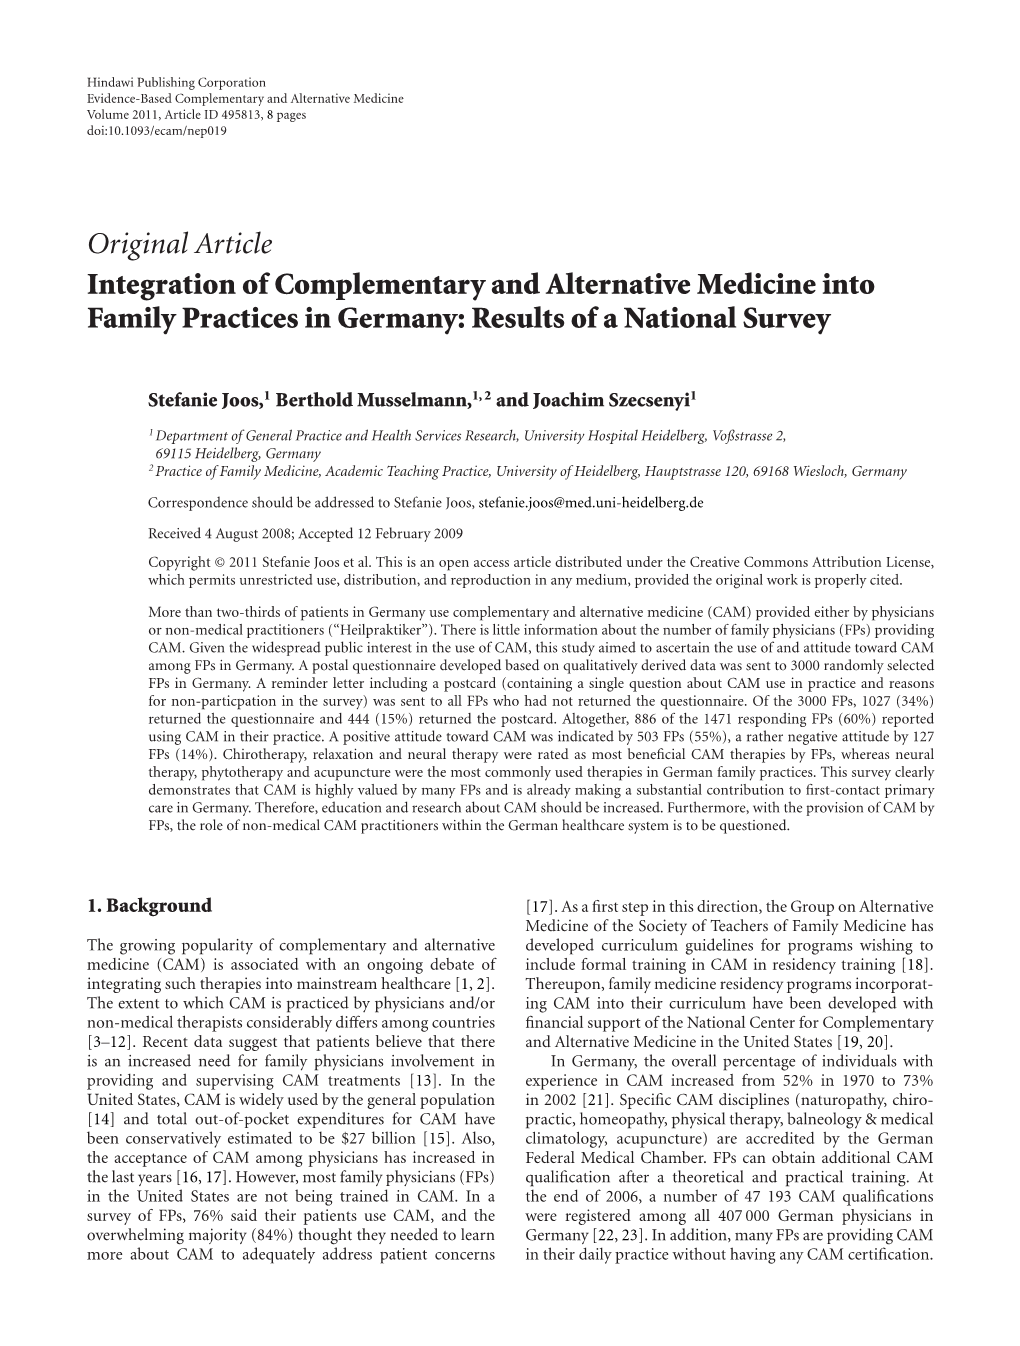 Integration of Complementary and Alternative Medicine Into Family Practices in Germany: Results of a National Survey